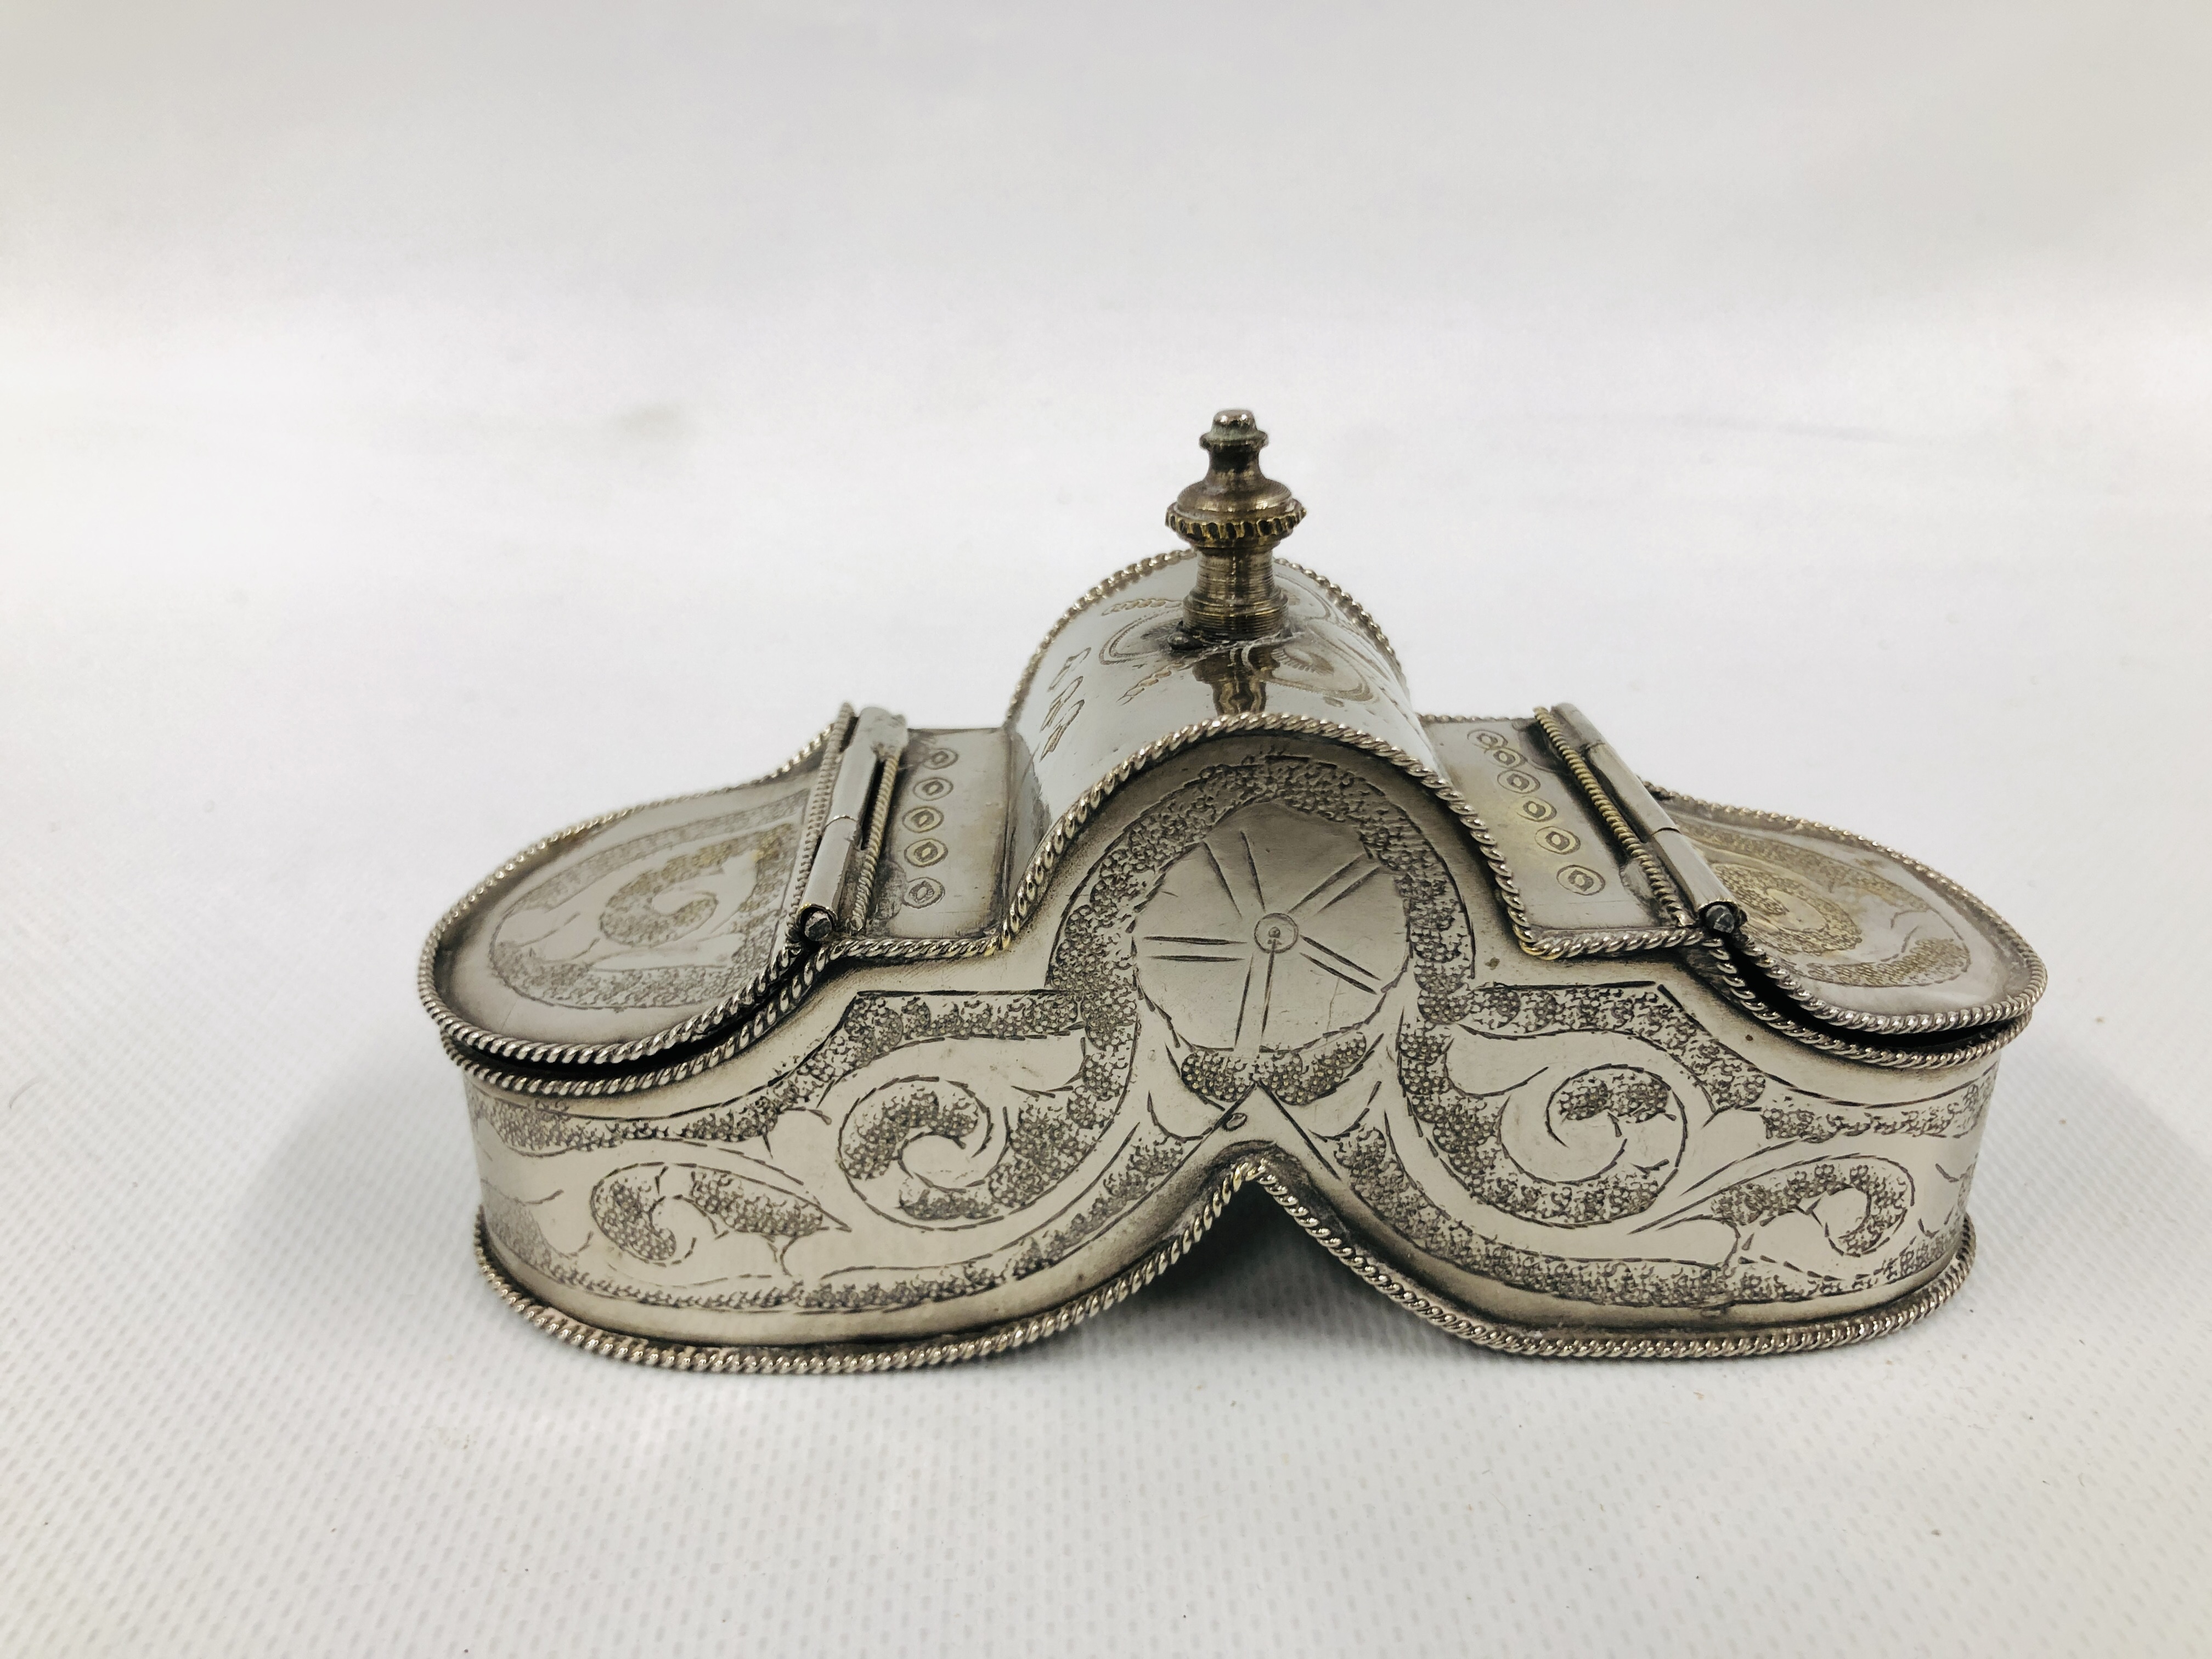 INDIAN SILVER AND WHITE METAL ITEMS TO INCLUDE A DESK TIDY, JEWELLERY BOX AND ASHTRAY. - Image 8 of 12